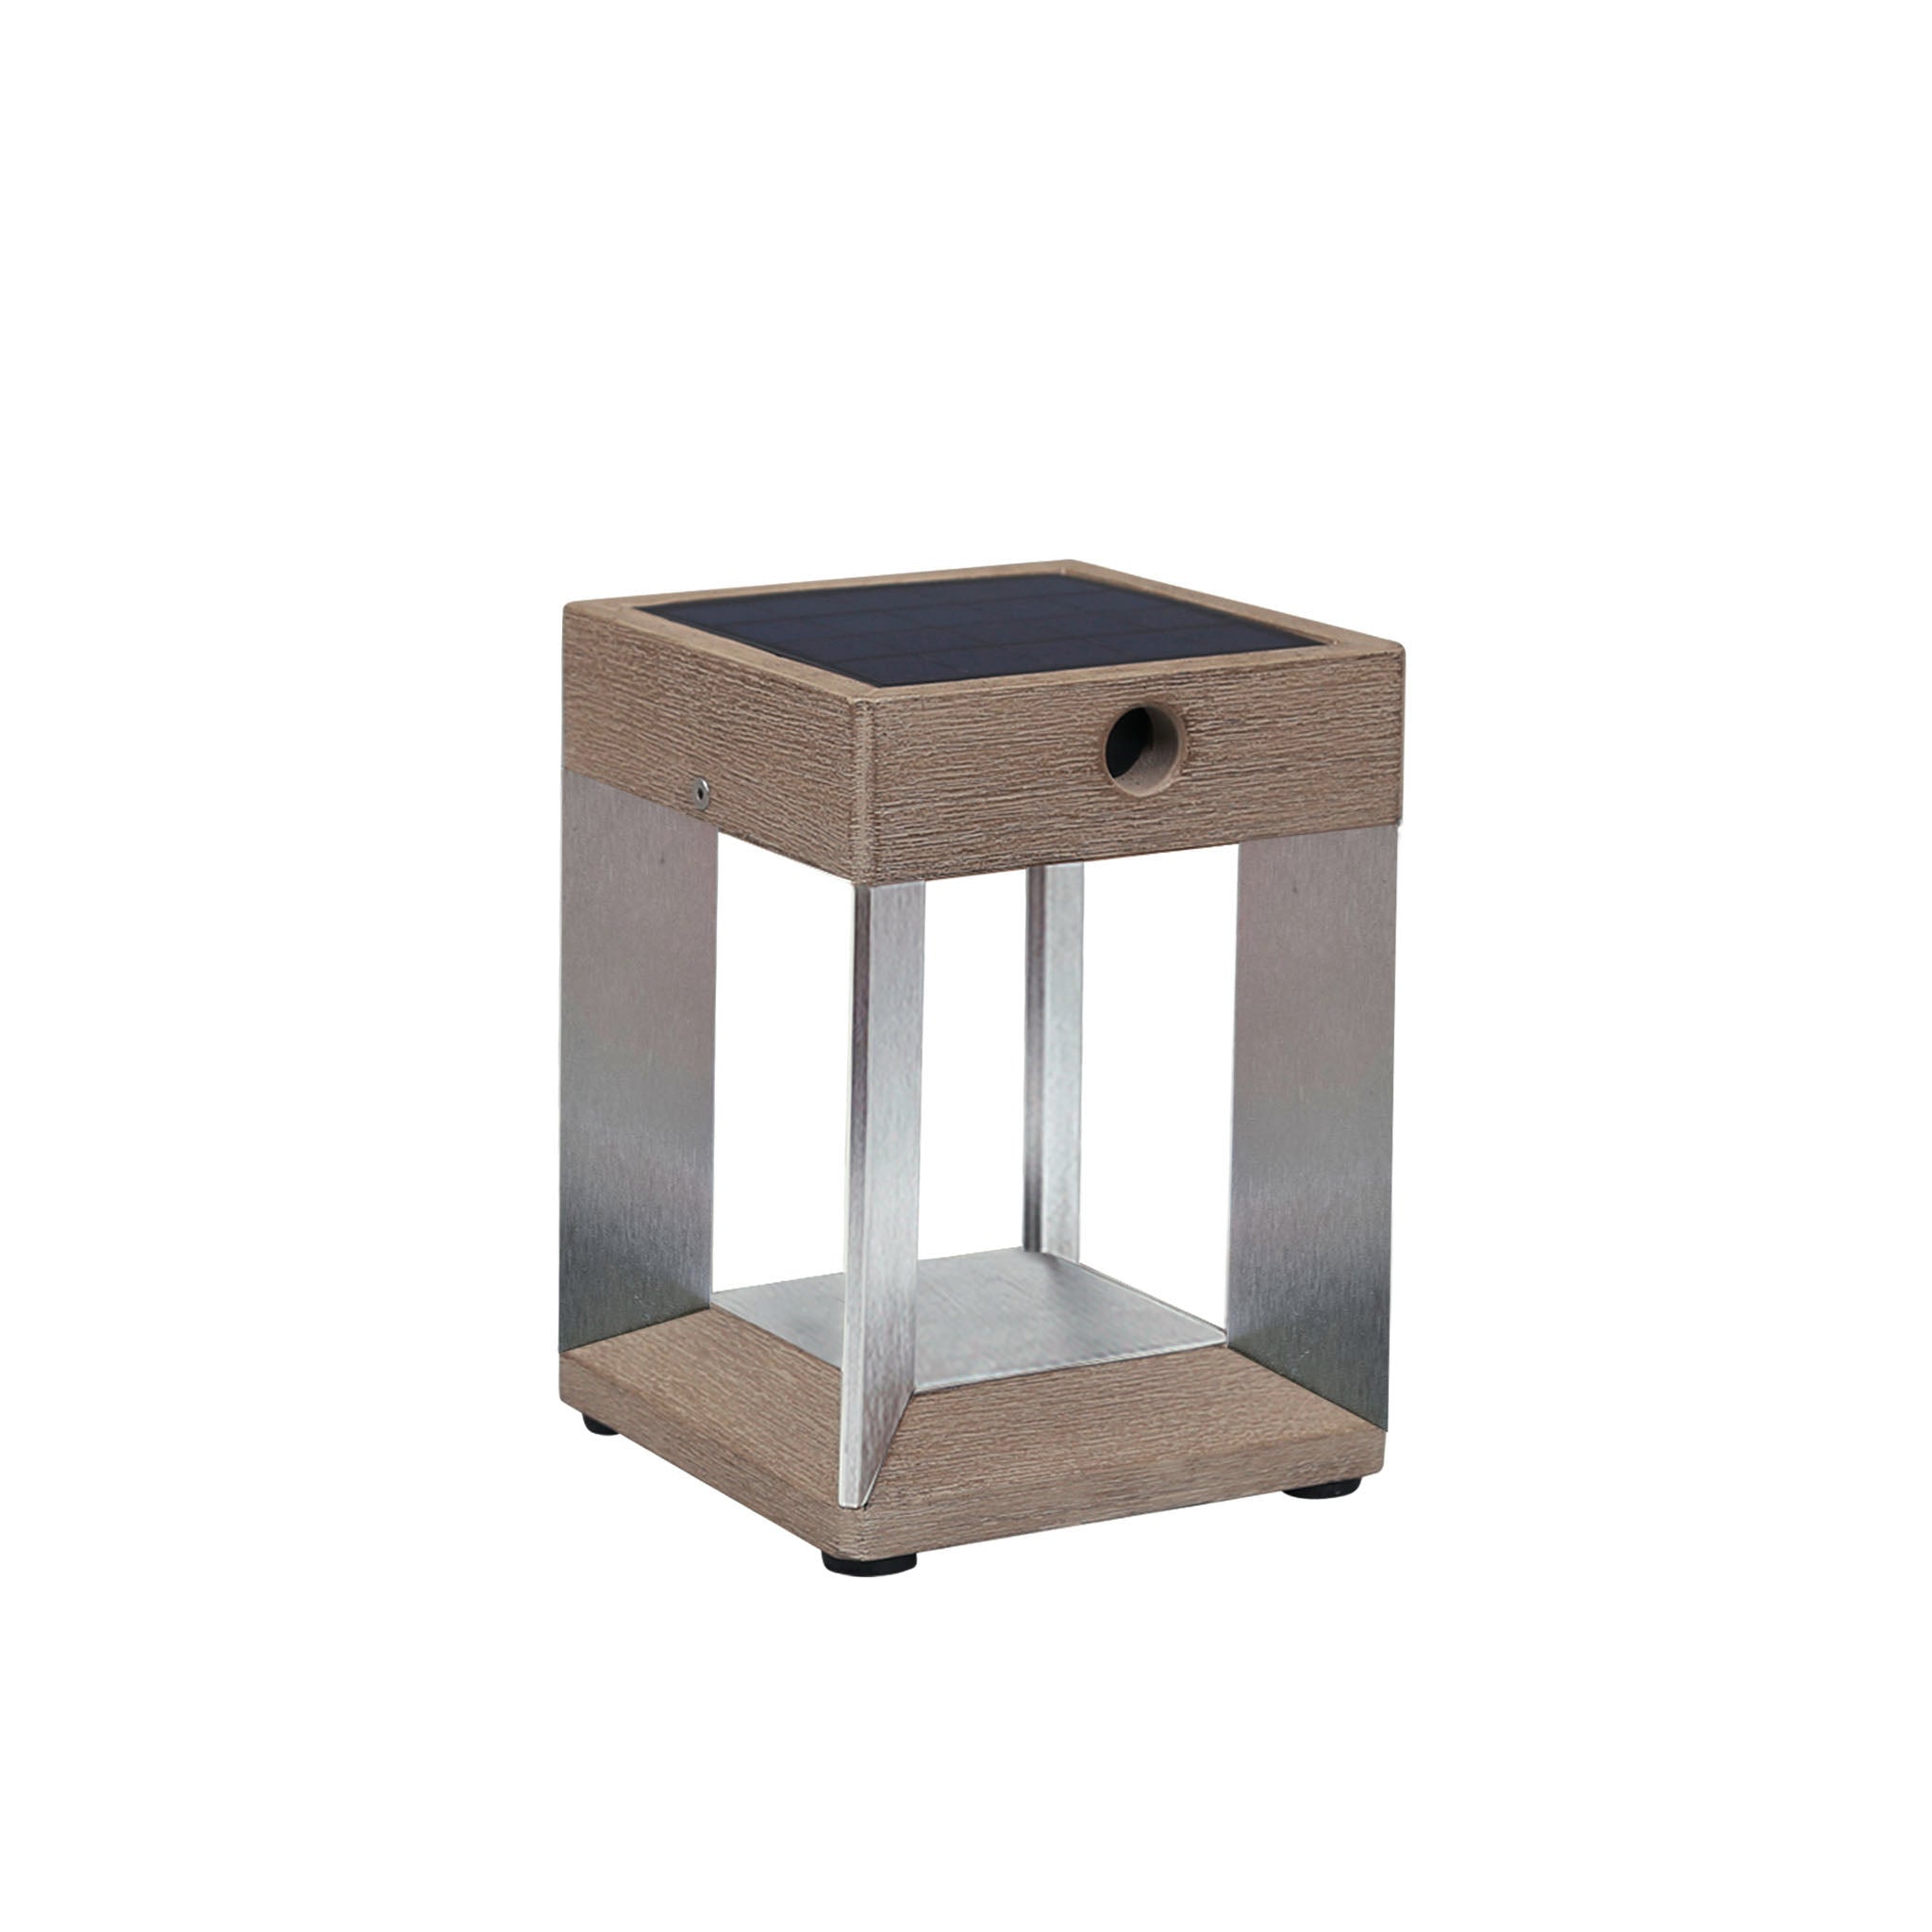 Blade table light in anodized aluminum weathered teak